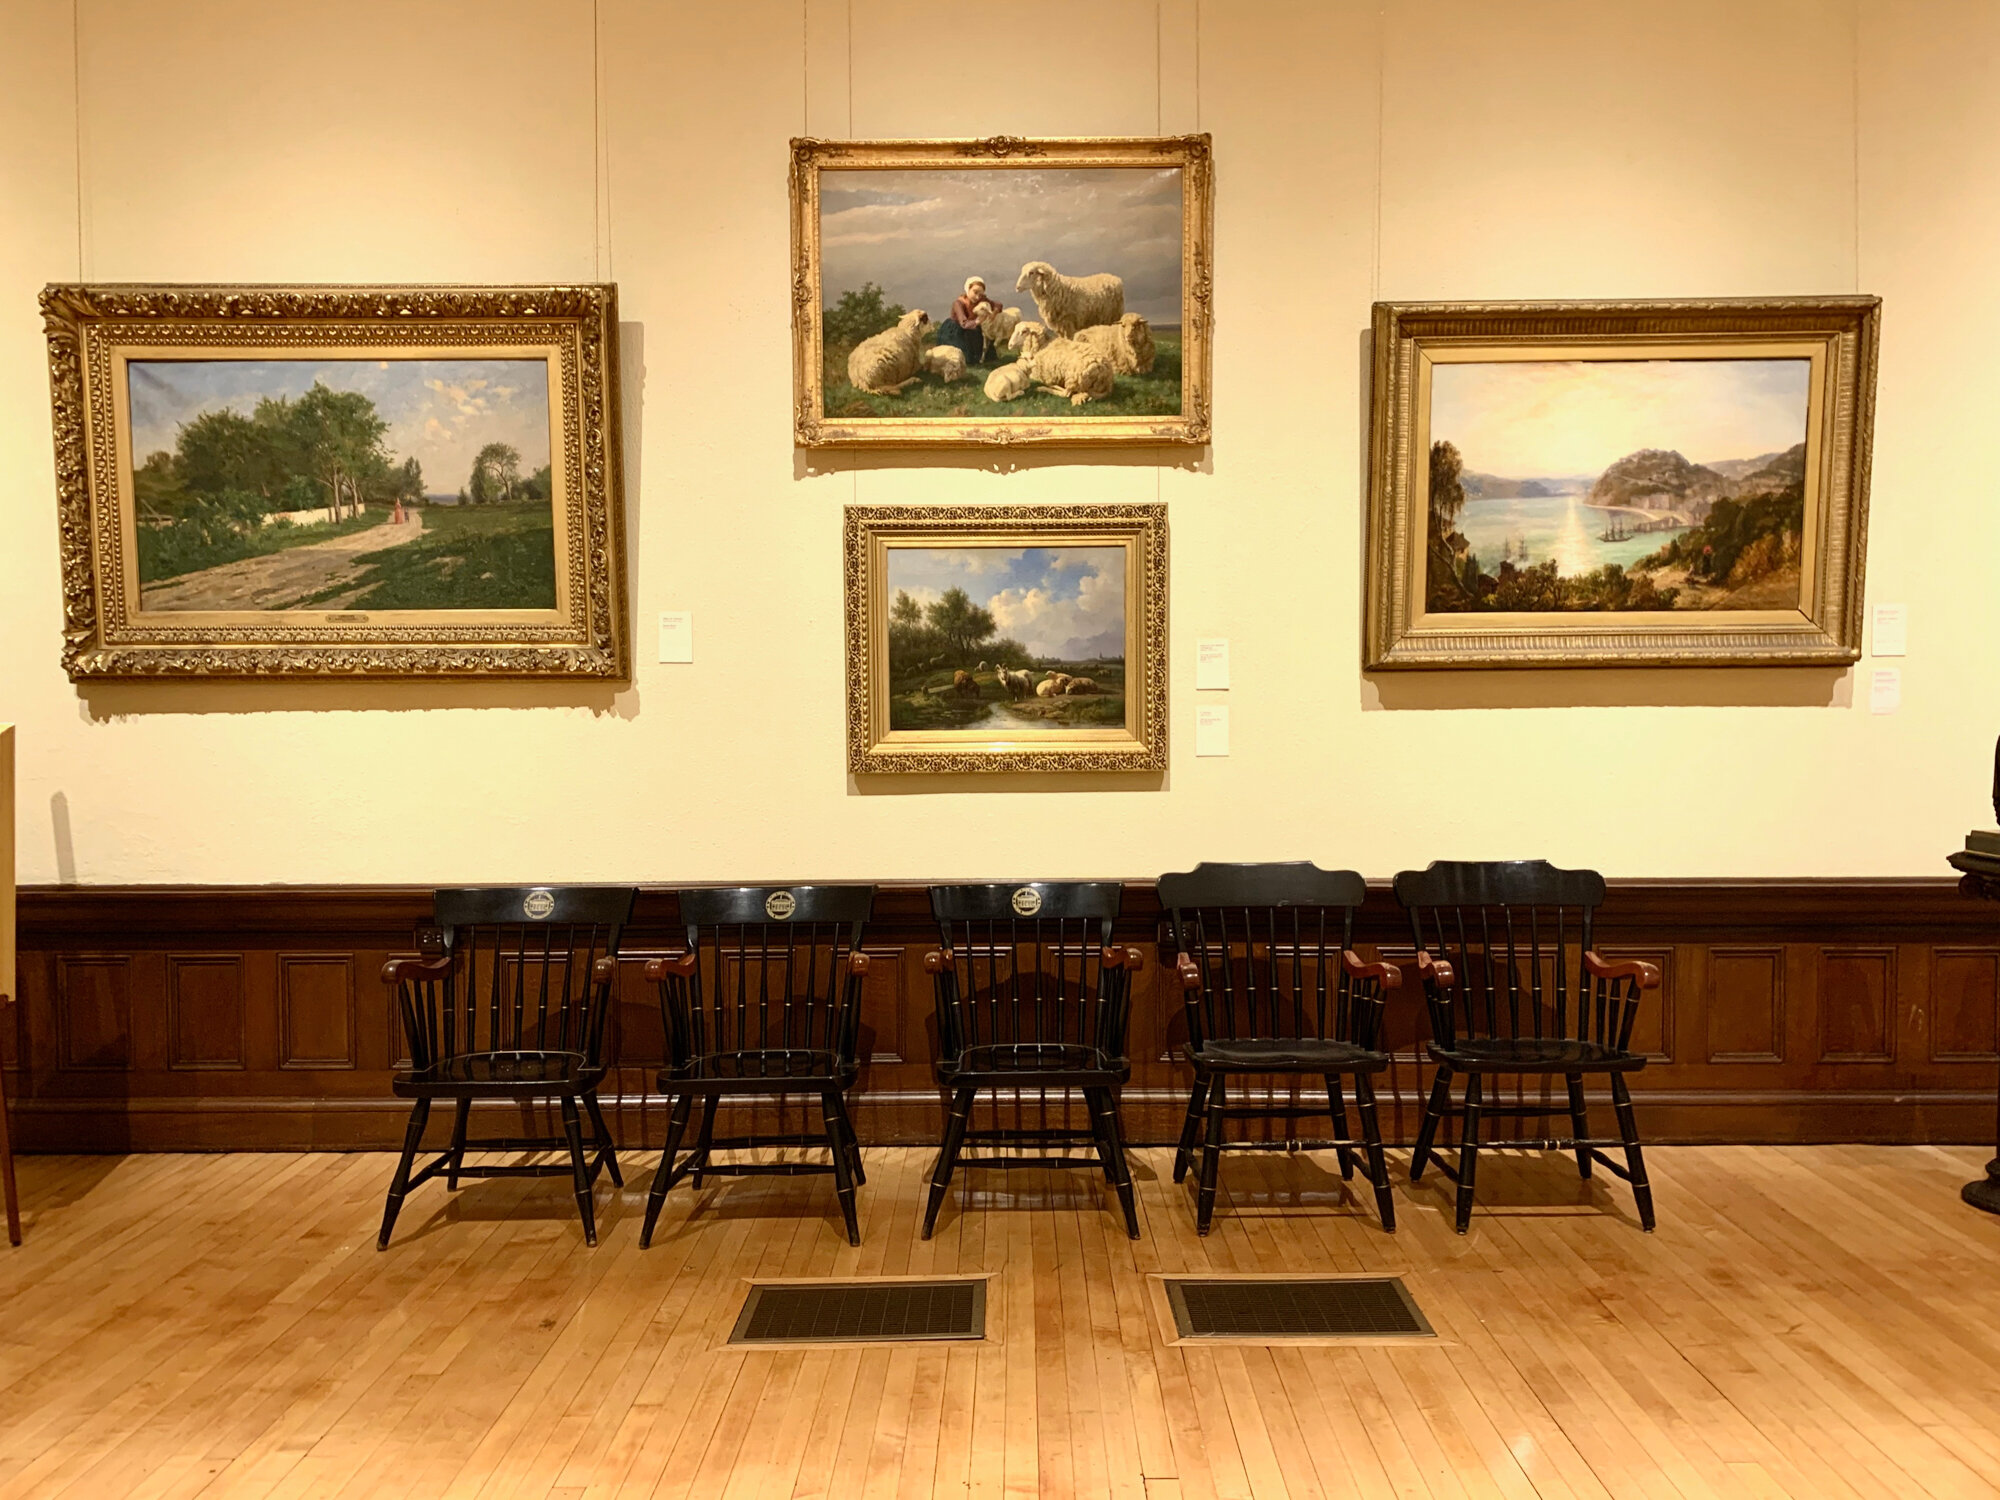 Artworks in the collection of the Converse Memorial Building, Malden